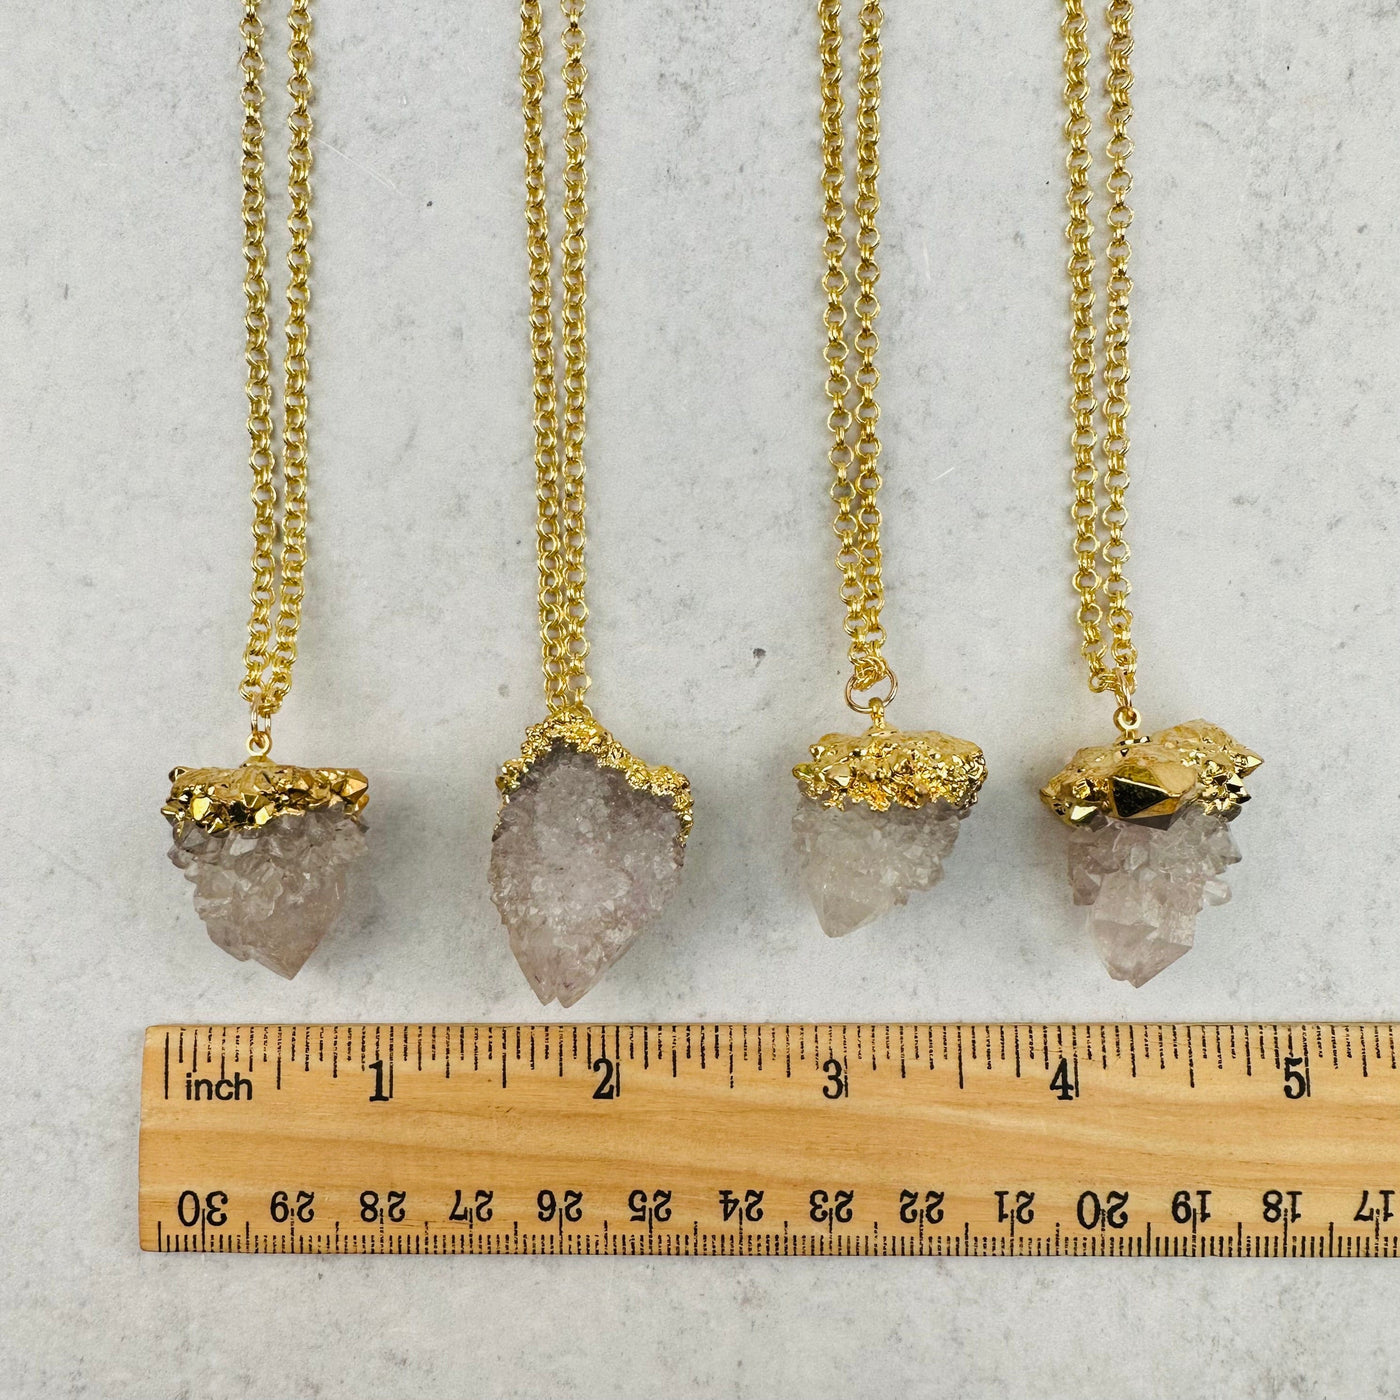 close up of the cactus quartz pendants next to a ruler for size reference